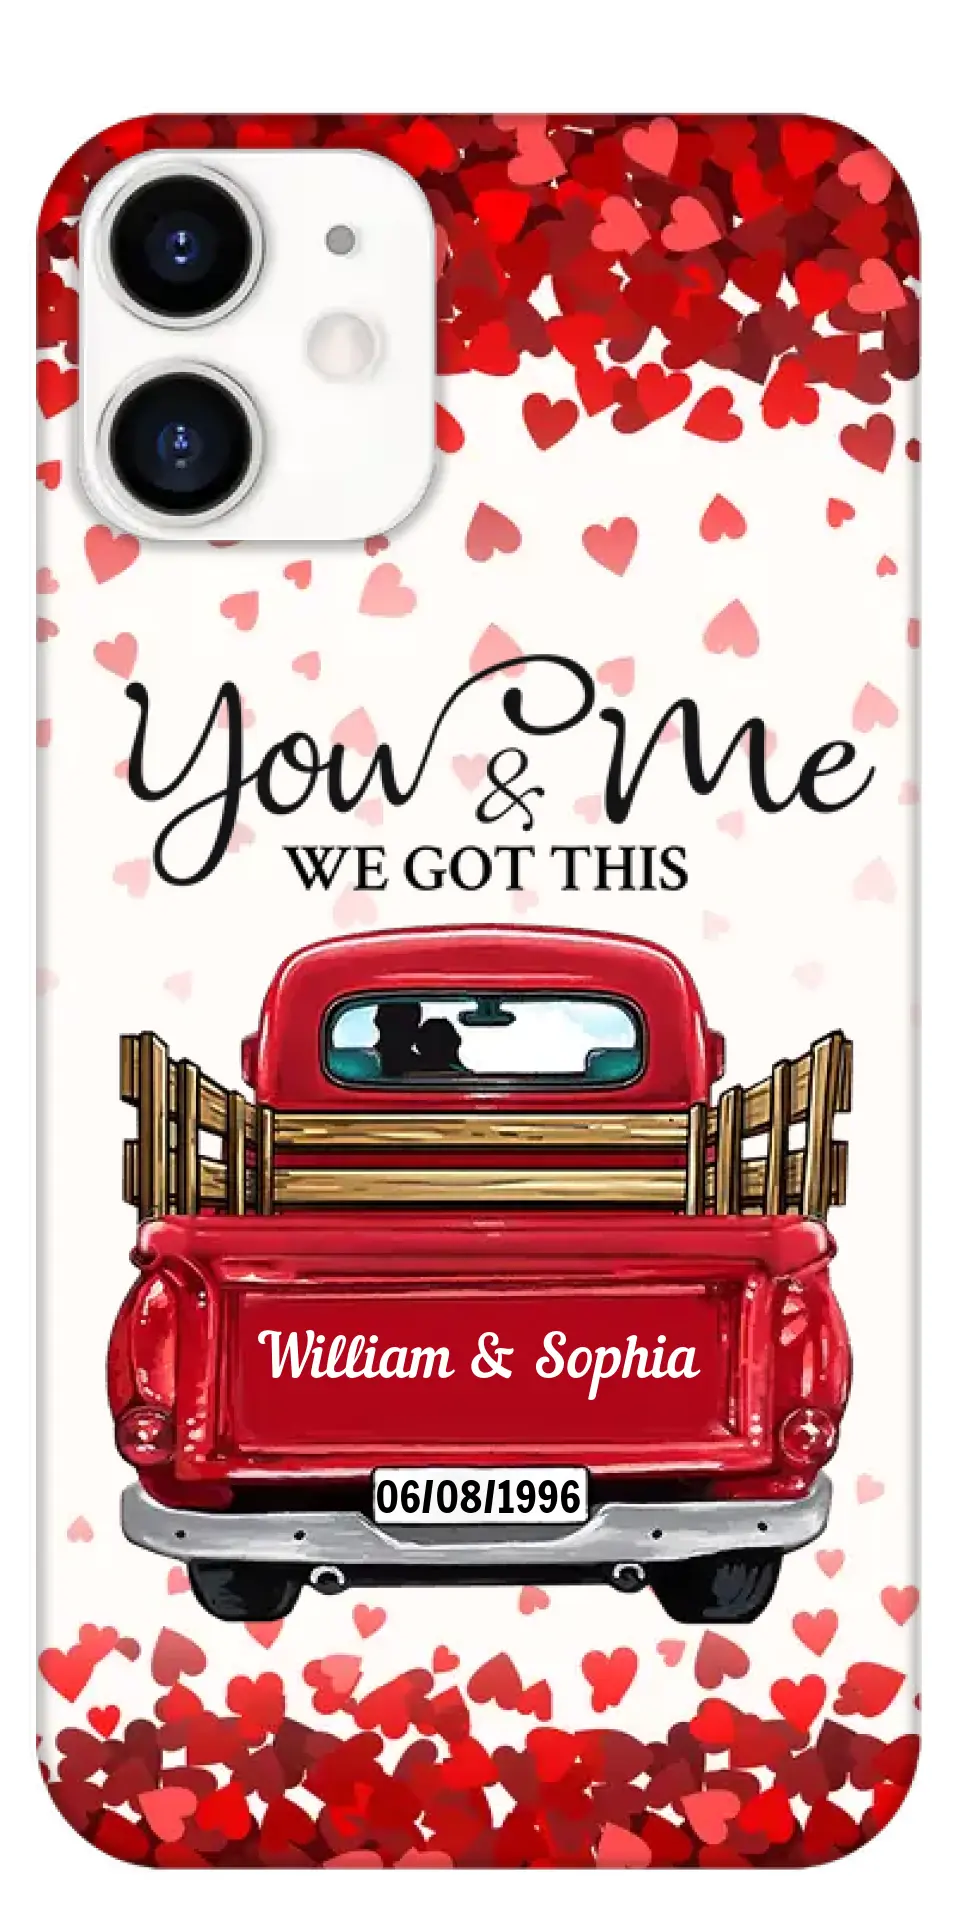 Sweet Couple On Red Truck, You & Me We Got This Personalized Phone Case